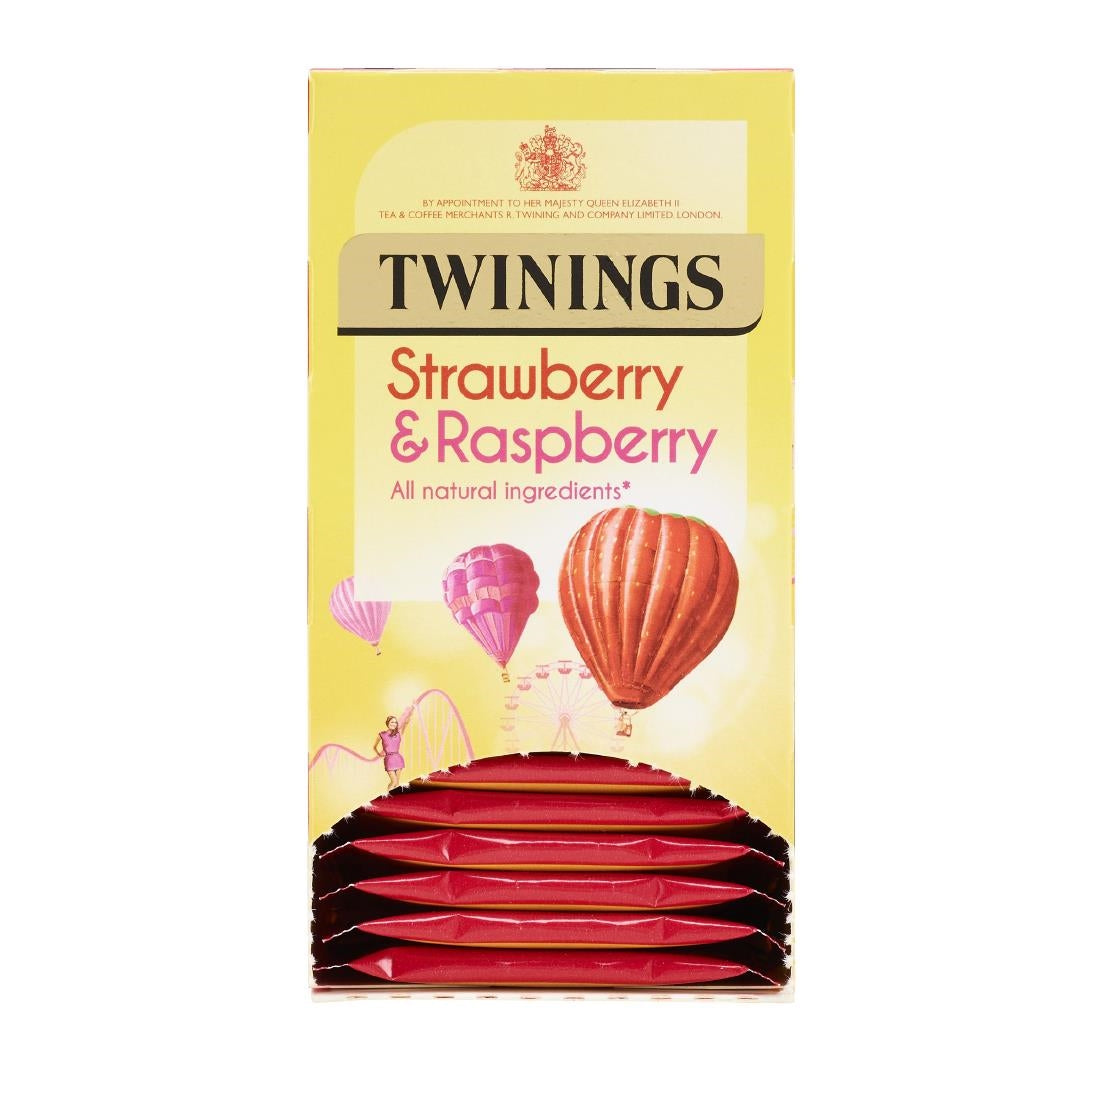 DZ465 Twinings Strawberry and Raspberry Enveloped Tea Bags (Pack of 240)